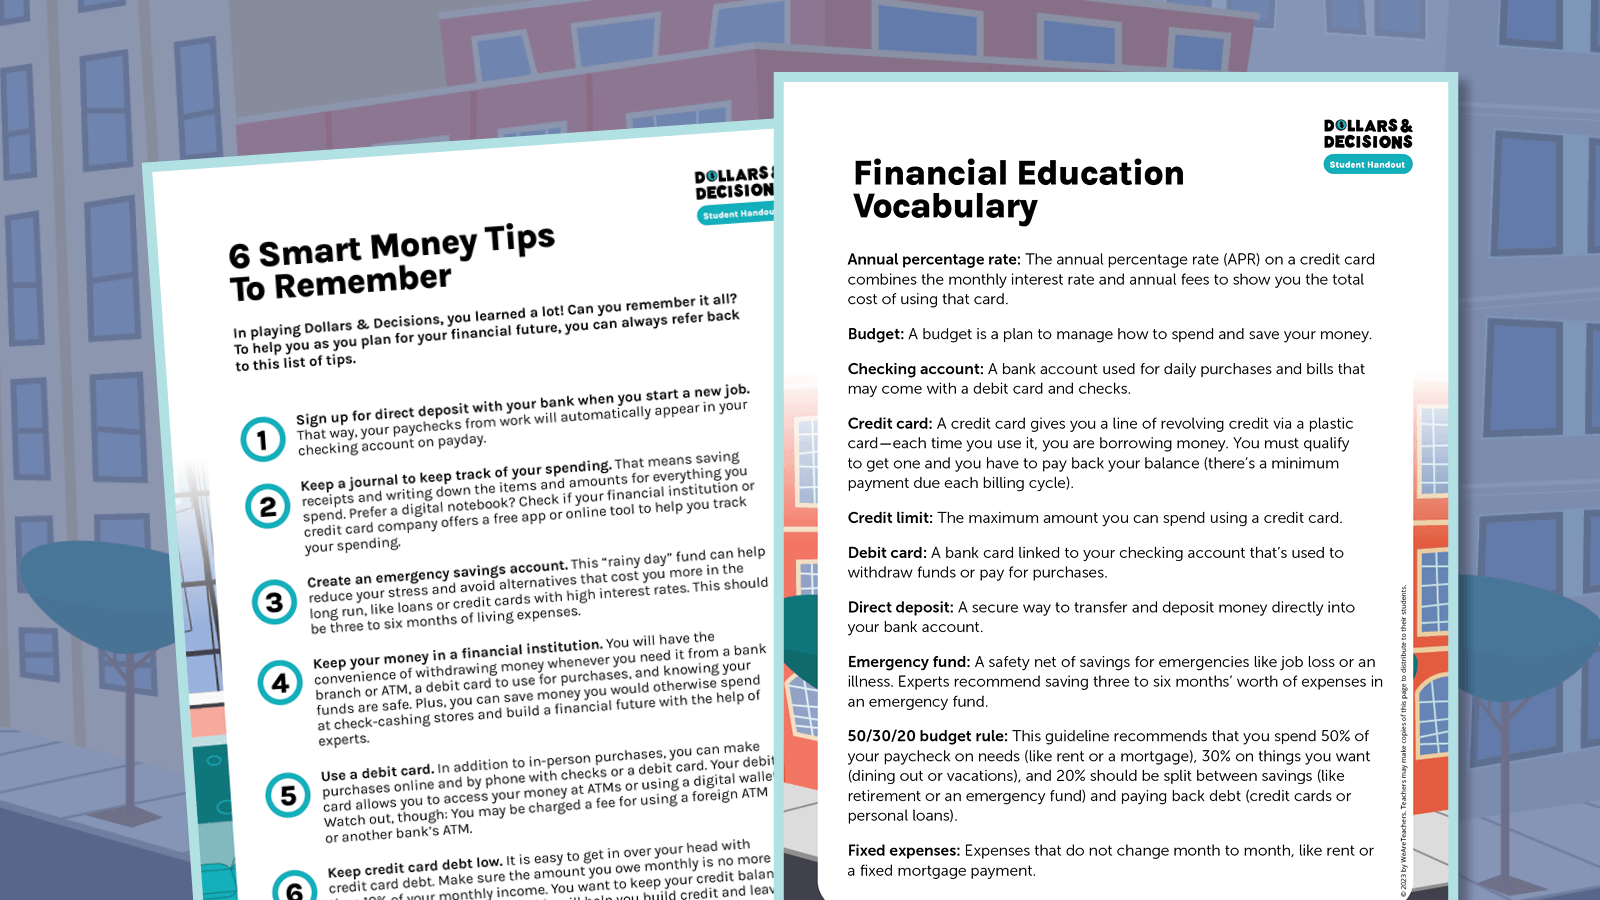 Dollars and decisions teacher guide